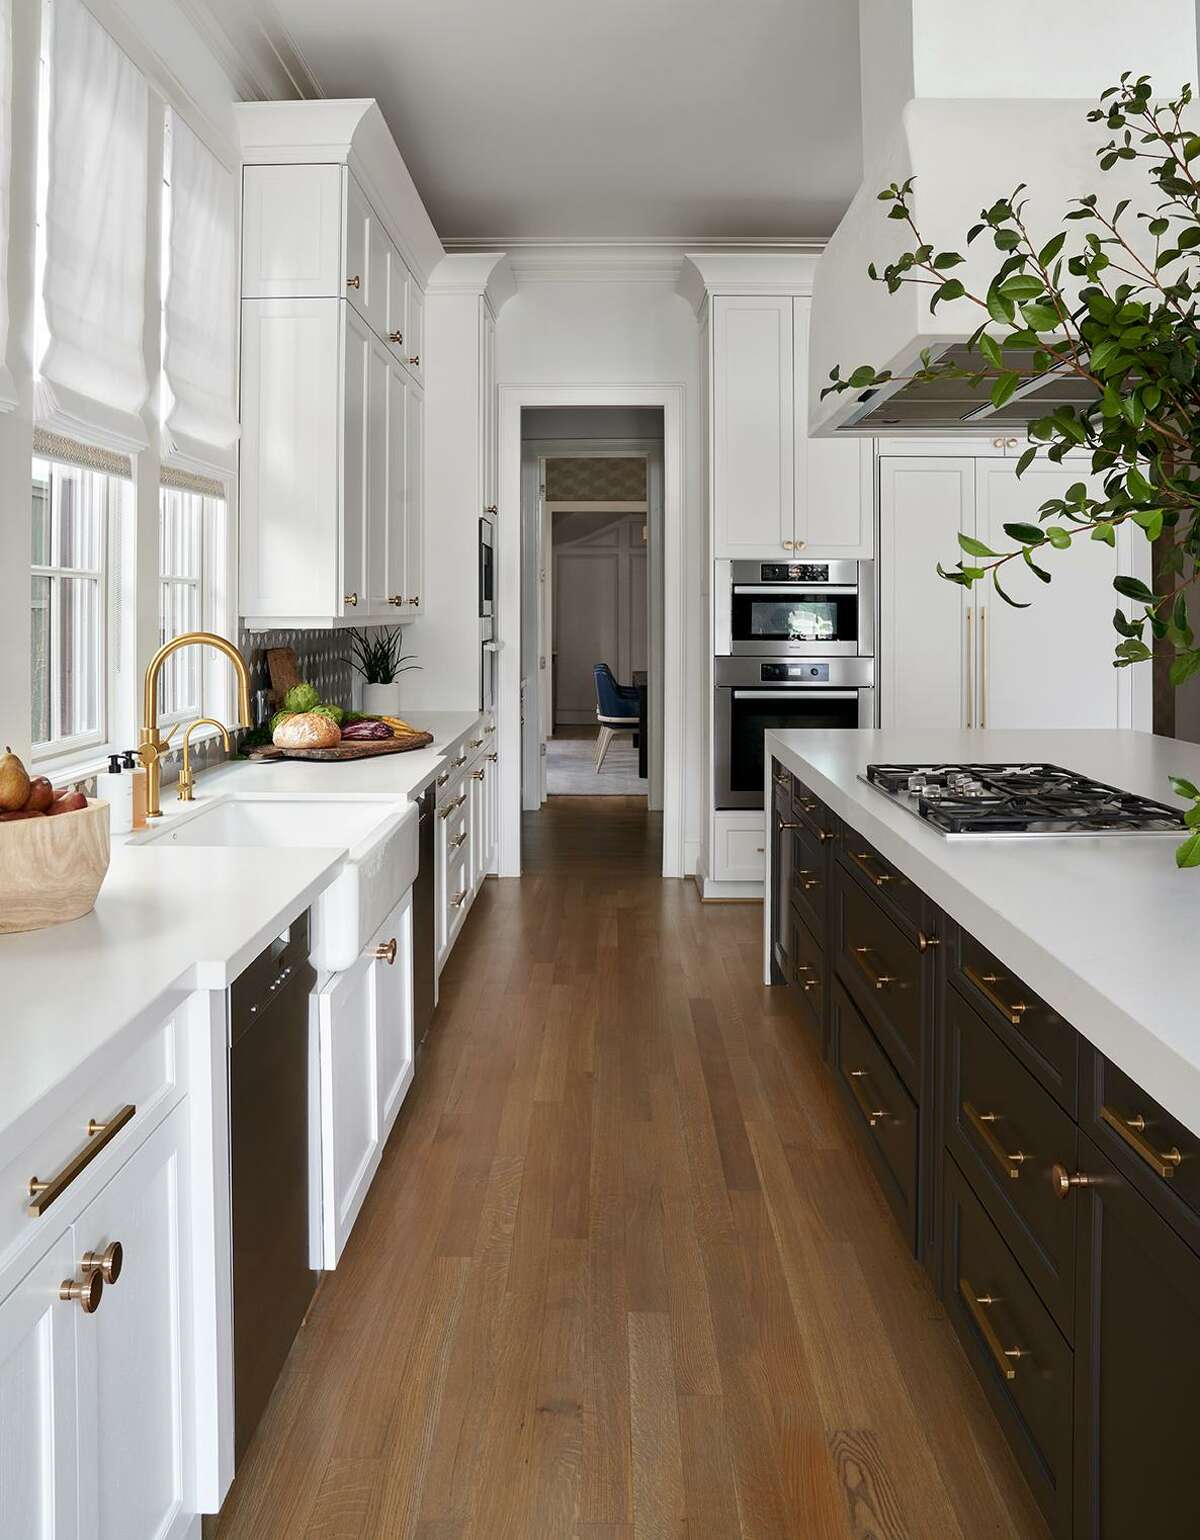 Black and white provide high contrast in the kitchen.